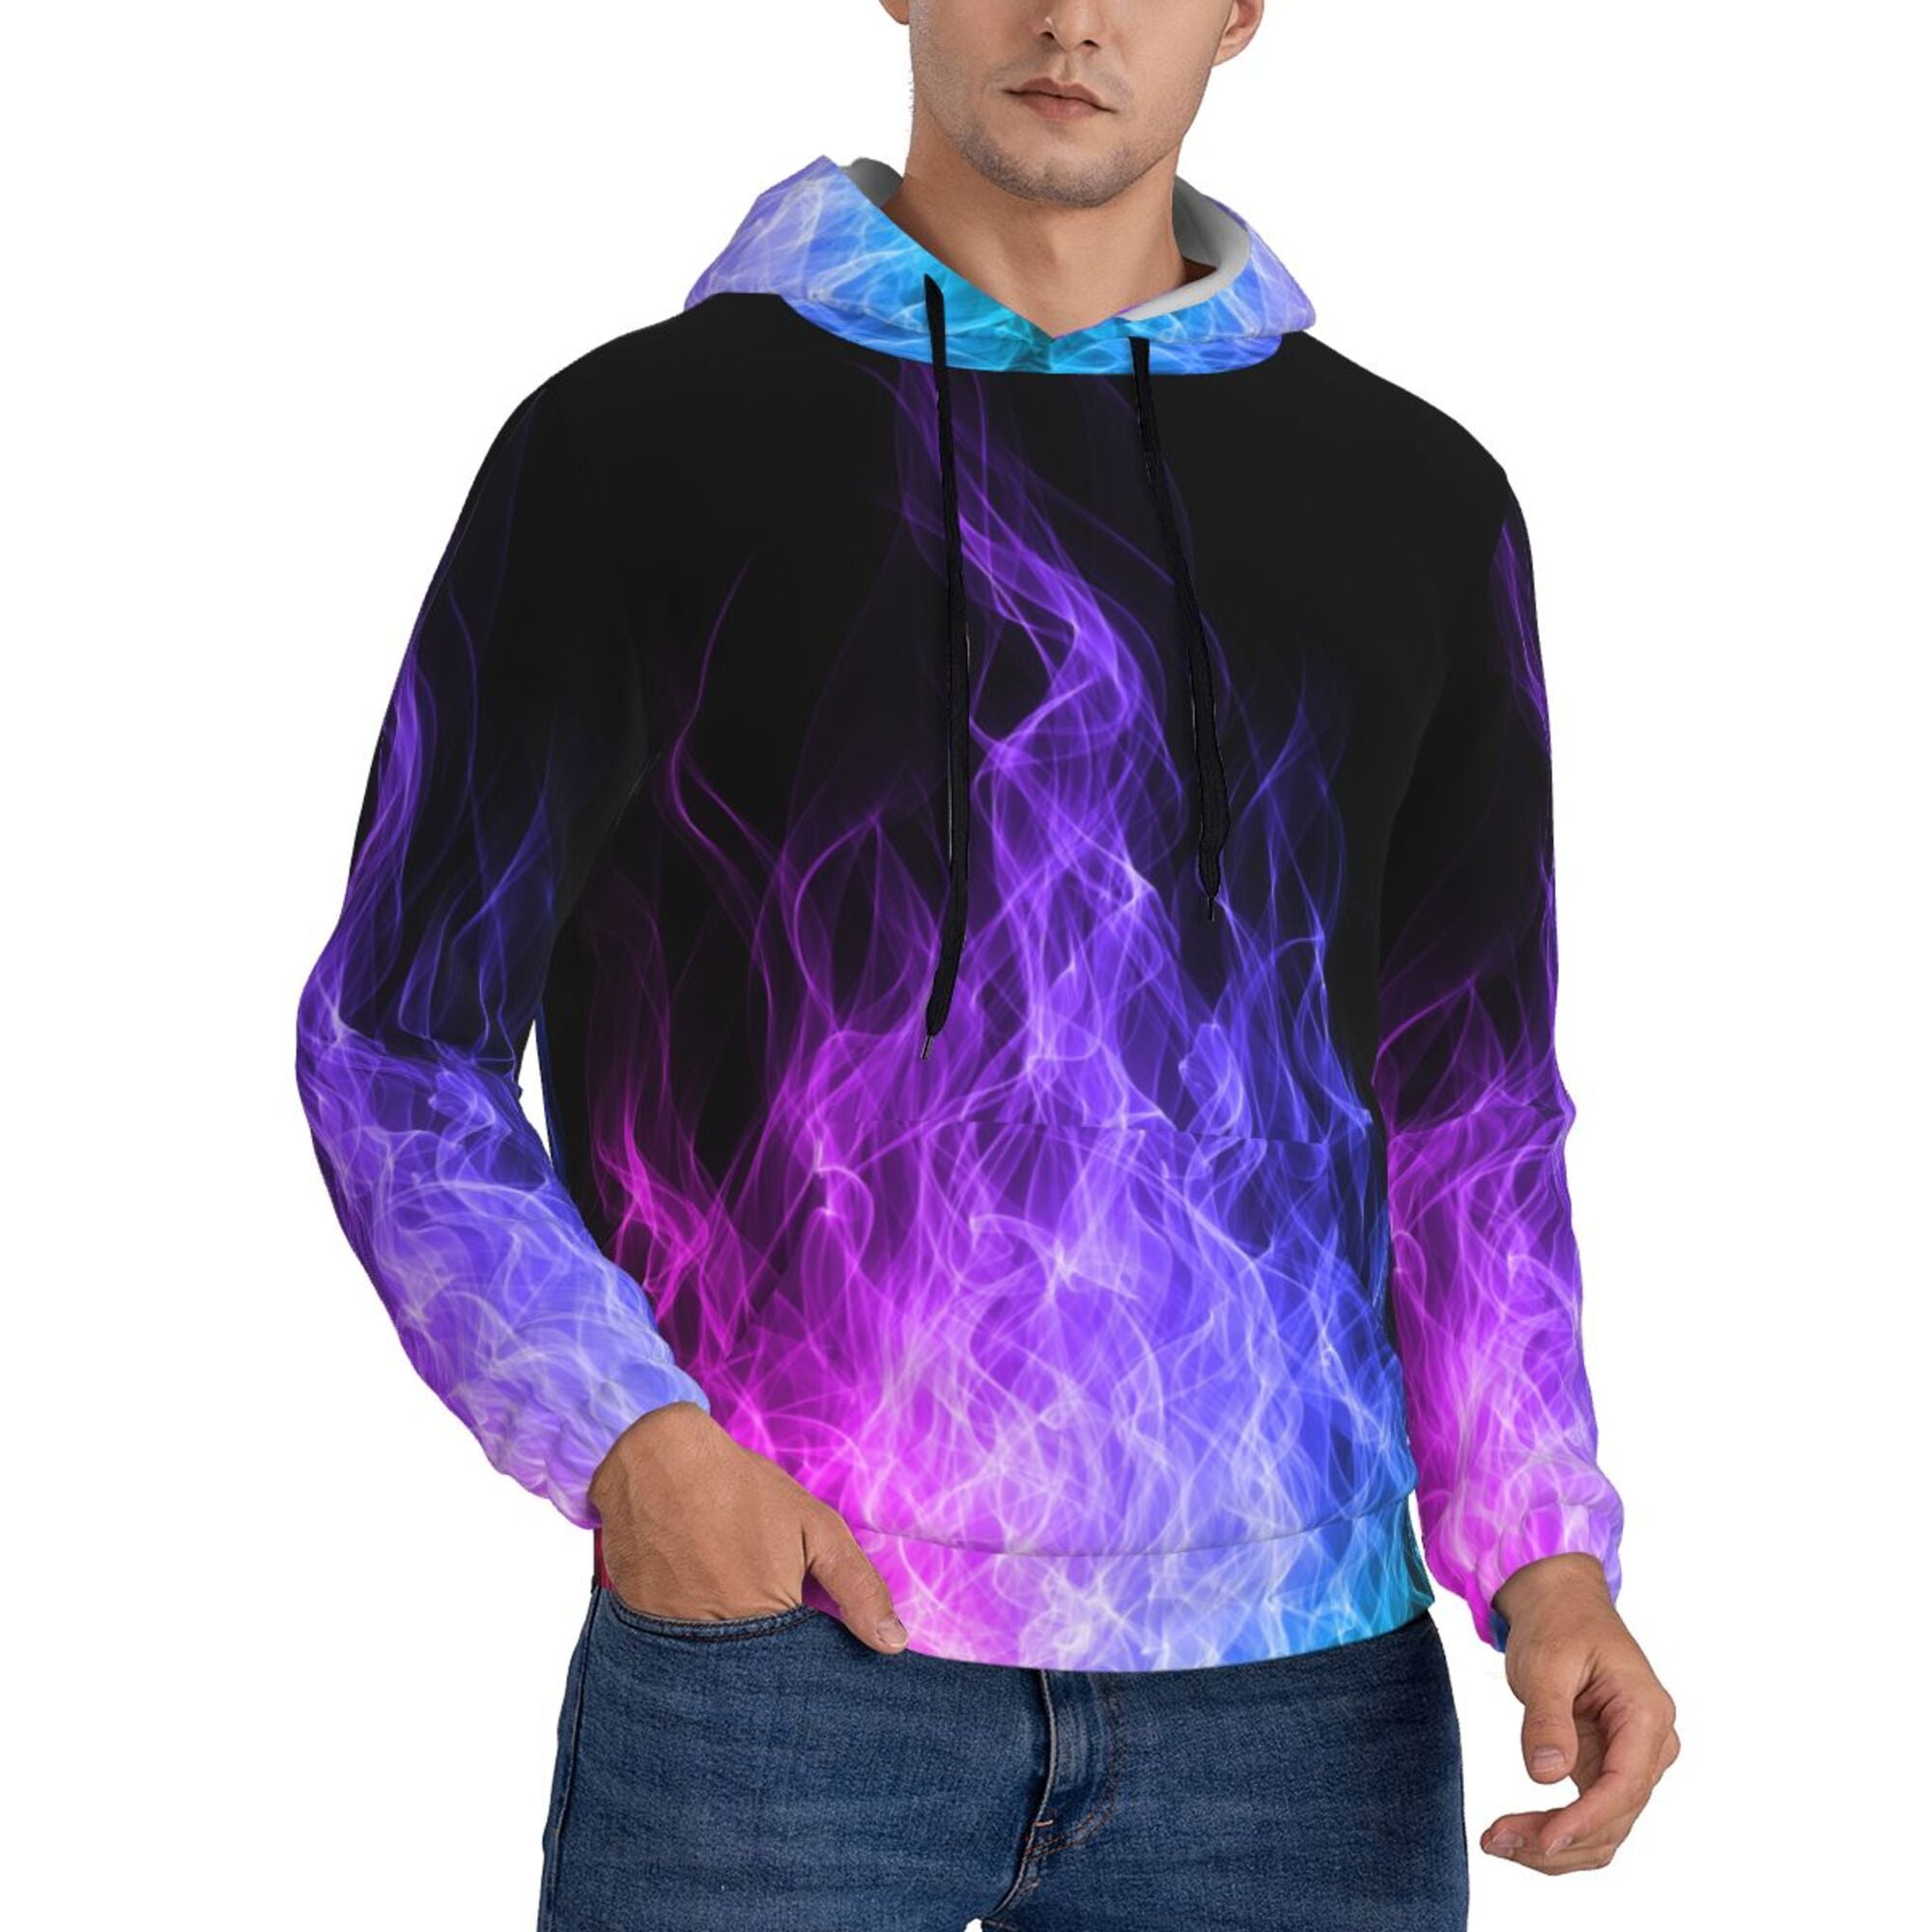  GOSBLUE Unisex 3D Print Hoodies - Graphic Hoodies For Xmas -  Unisex 3D Sublimation Christmas Pullover Hoodie For Men & Women : Clothing